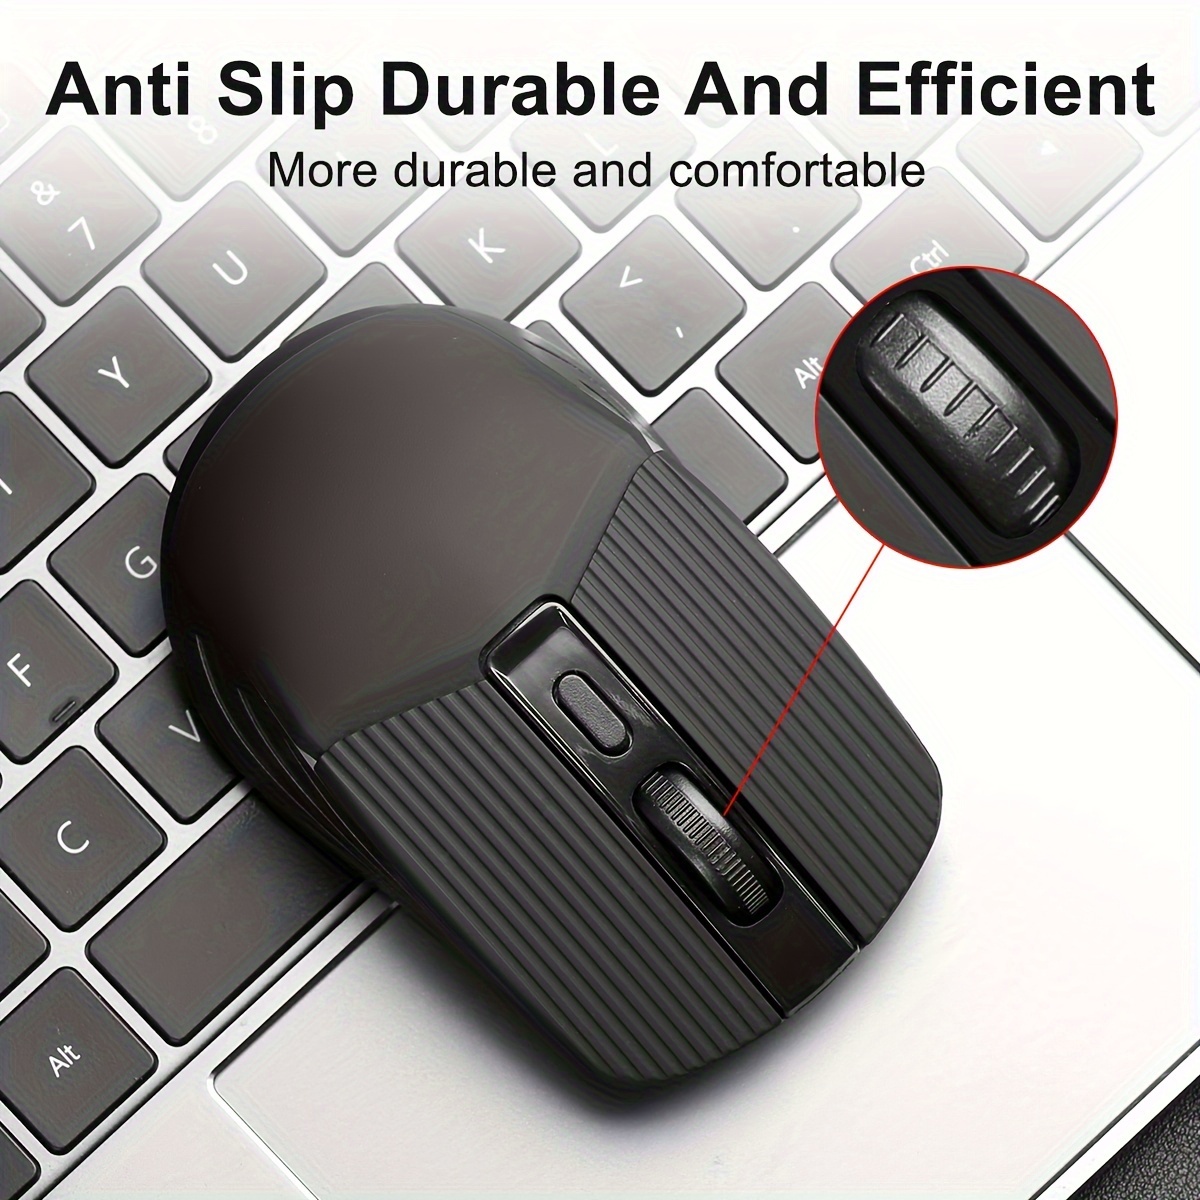 

Wireless Mouse Office Laptop 4d Button Office Mouse Dpi 3 Speed 1200/1600/3200 Usb Receiver Mobile Optical Wireless Mouse, Suitable For Laptops, Tablets, And Desktops